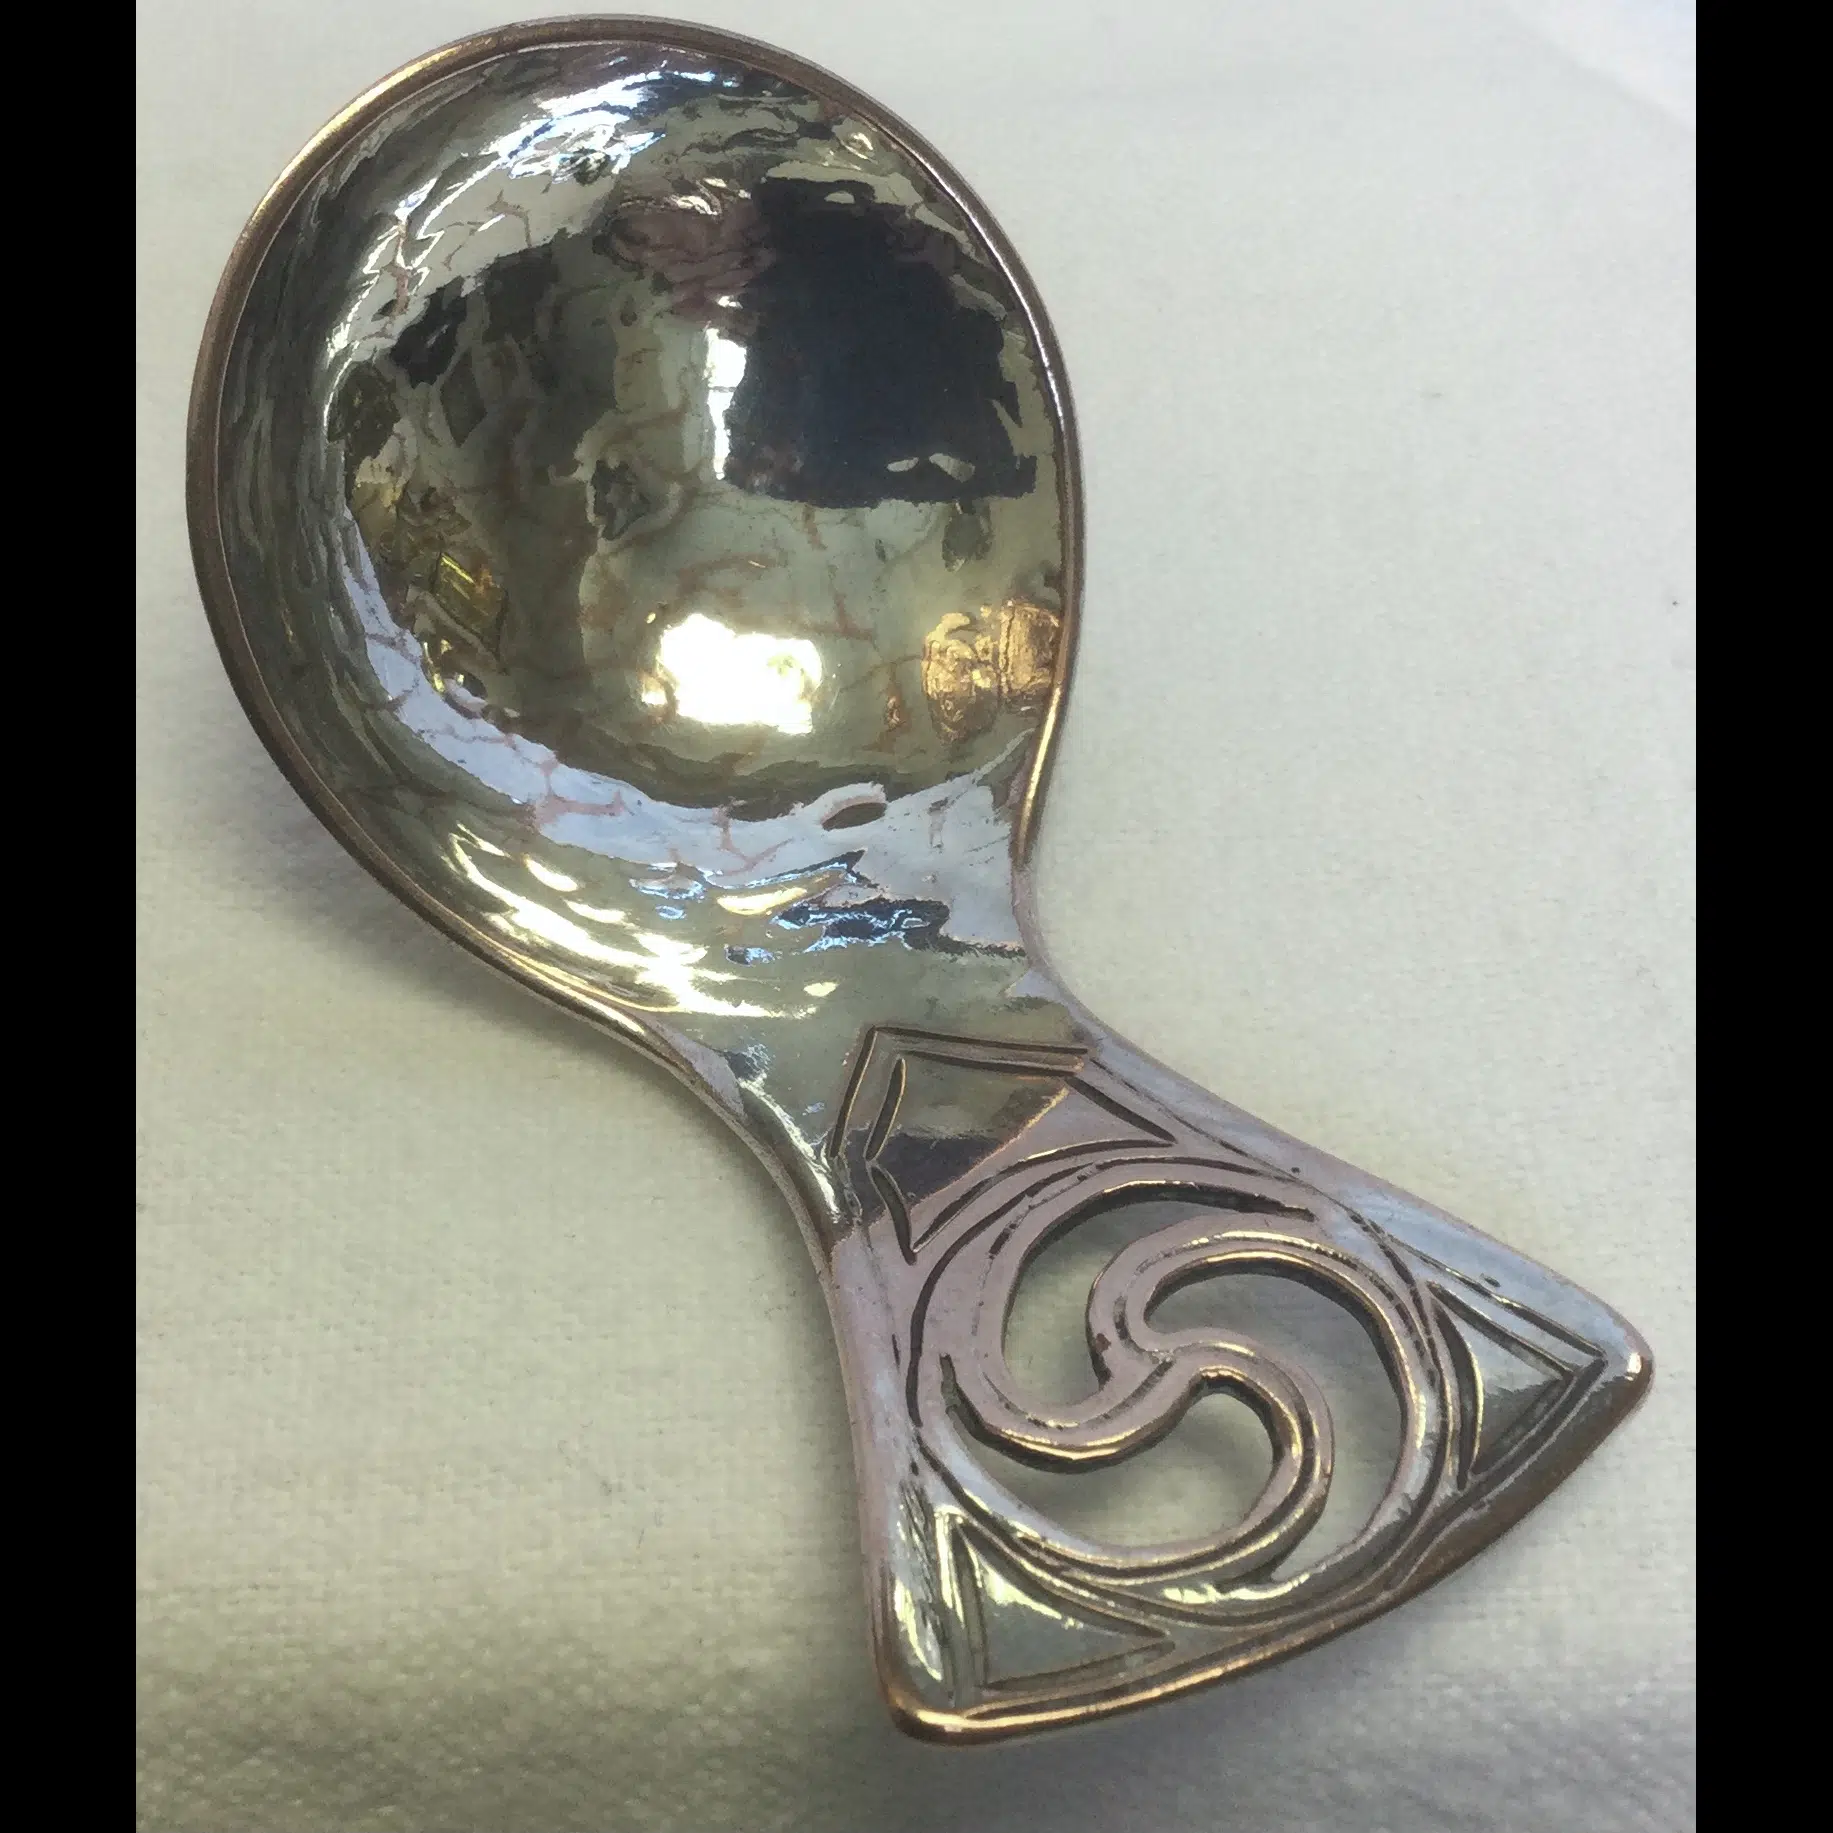 morecambe hec silver plated and pierced caddy spoon